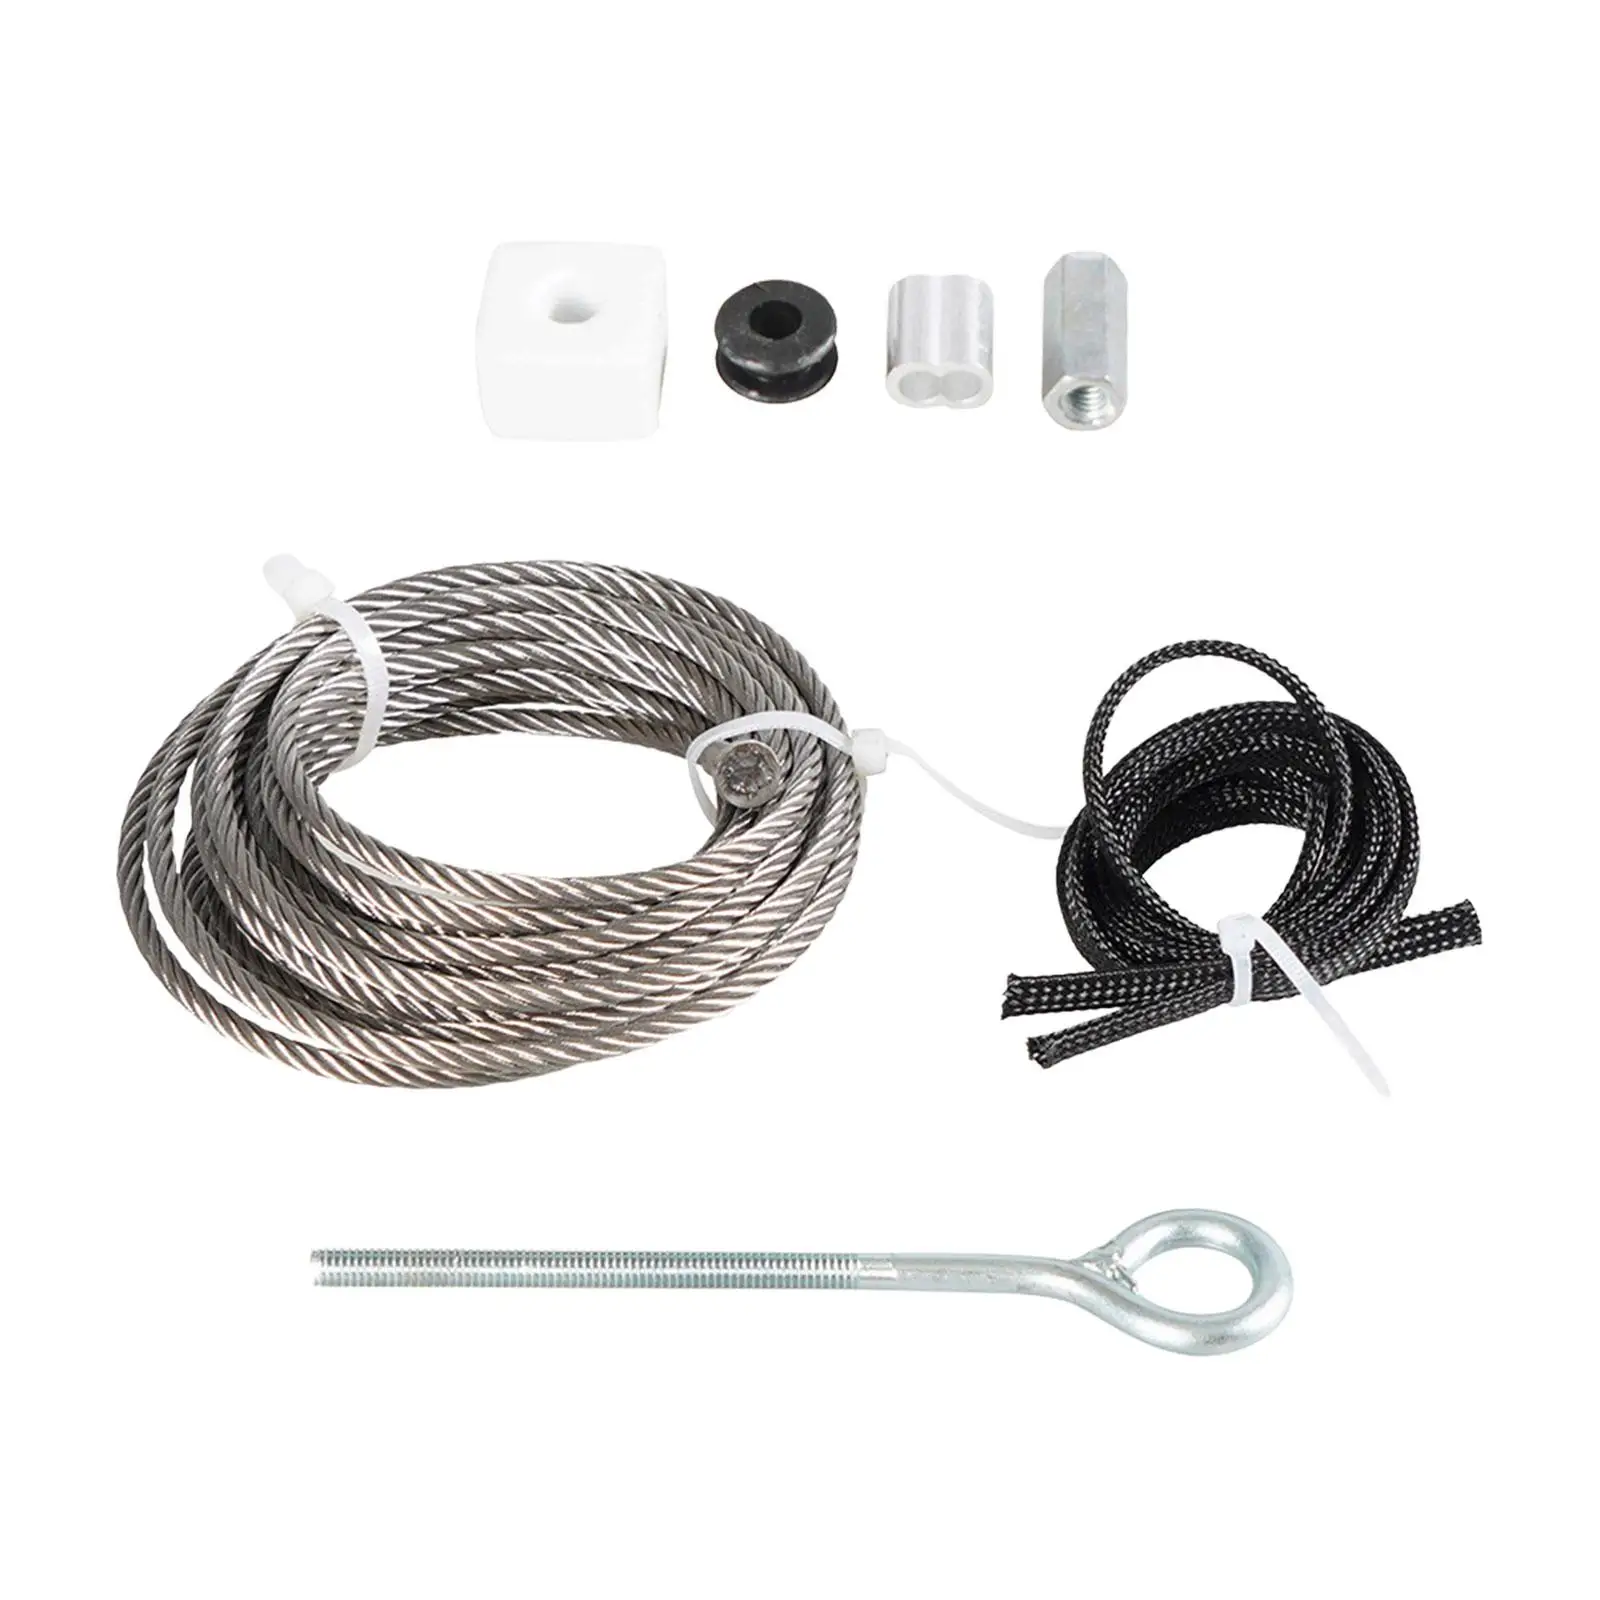 5/32 Stainless Steel Accuslide Cable Repair Set for Accuslide System